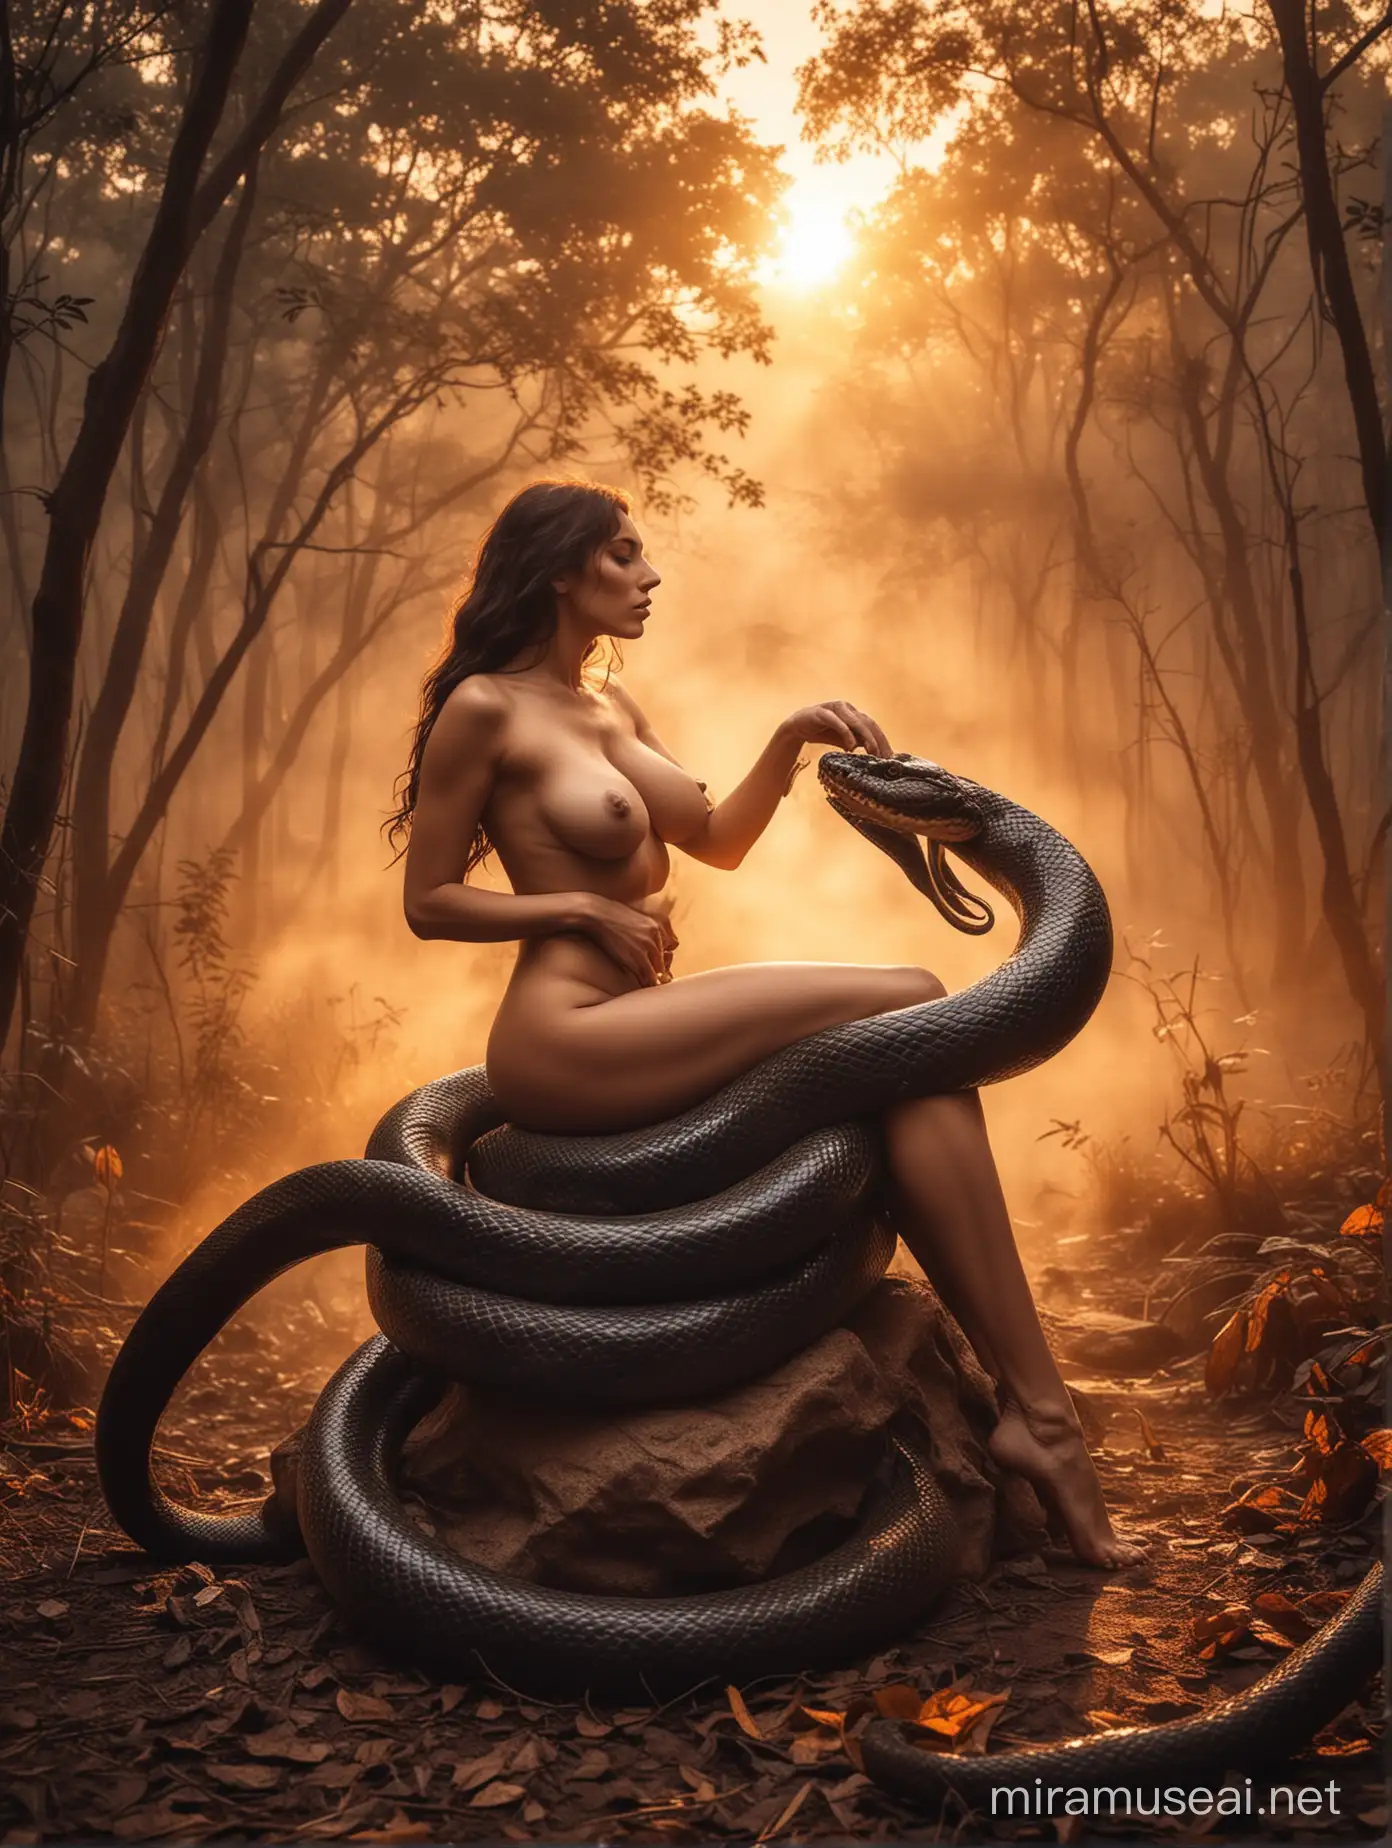 Nude Woman Attacked by Giant Snake in Enchanted Forest Scene